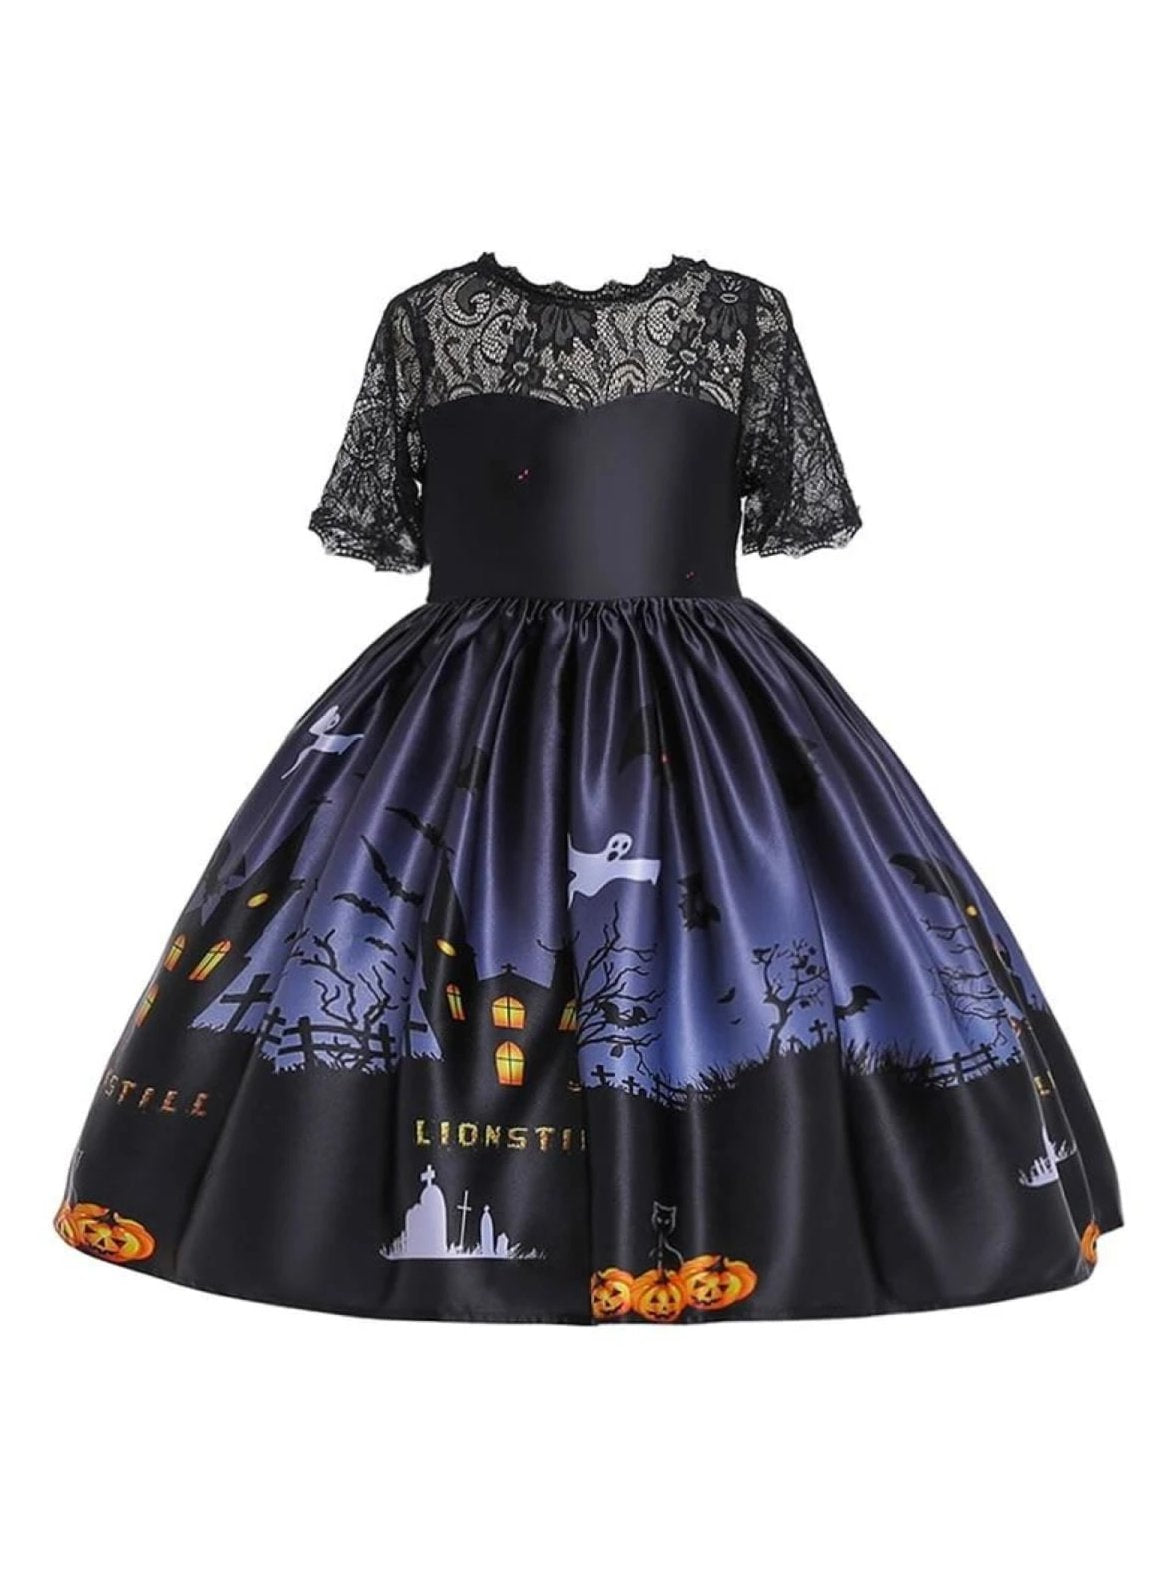 Girls Halloween Fancy Witches Pumpkins and Ghosts Gown - Black / 4T - Girls Halloween Dress